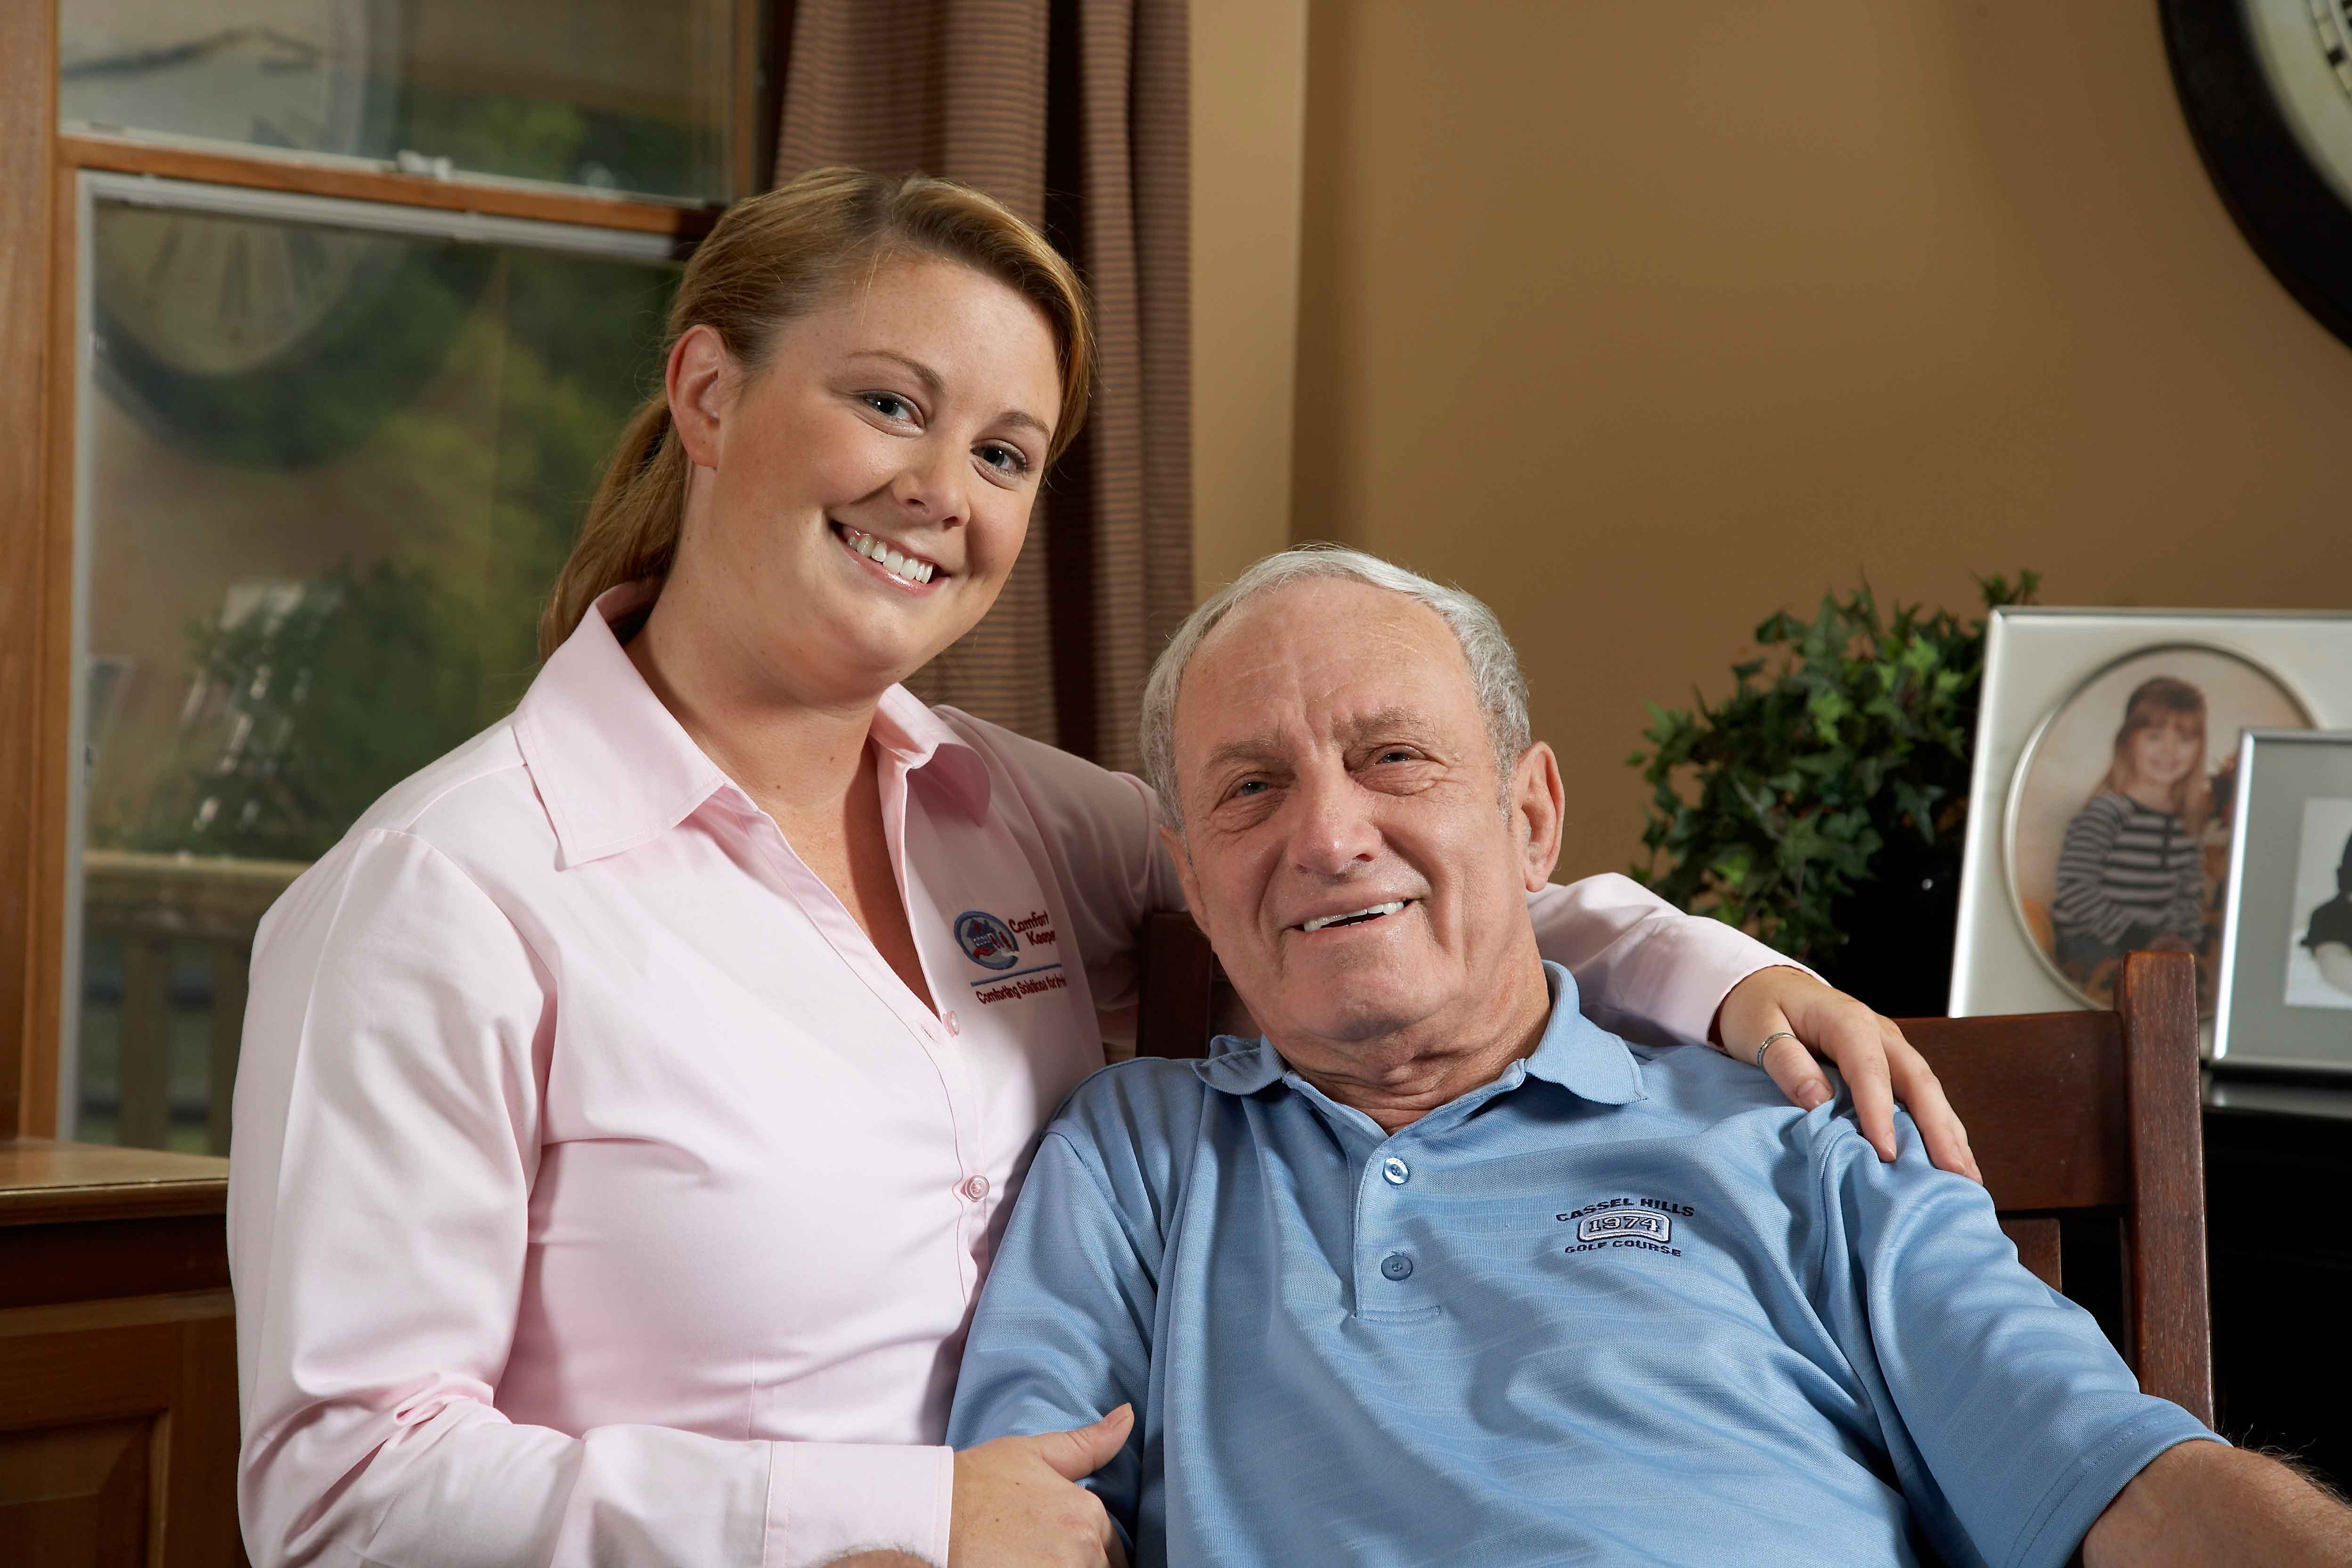 Comfort Keepers image